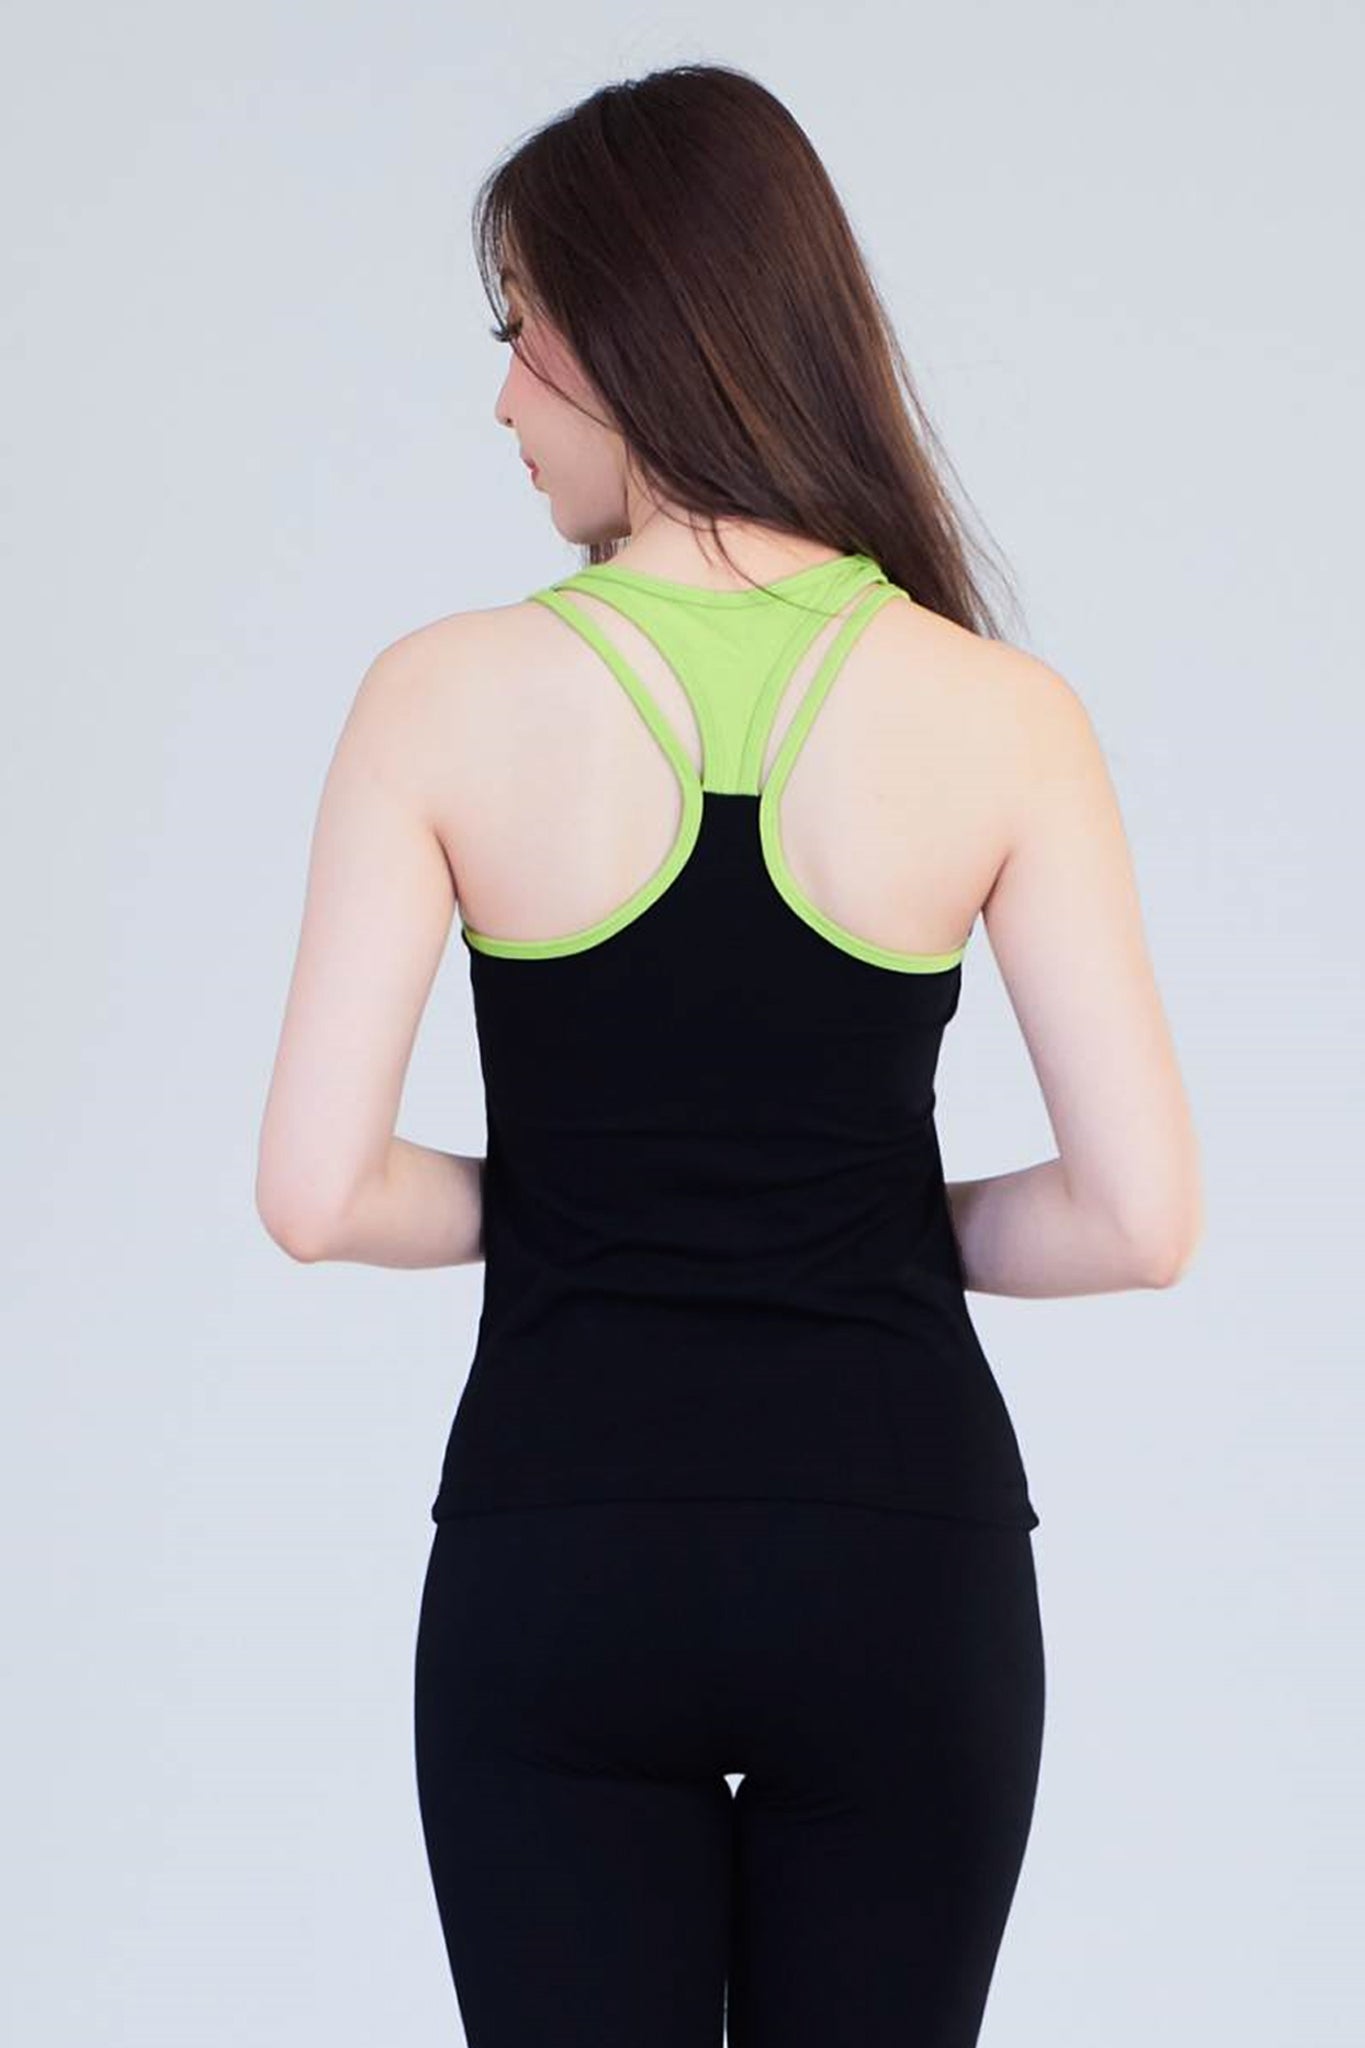 IBY - Sleeve Sports Top Build In Bra No.734